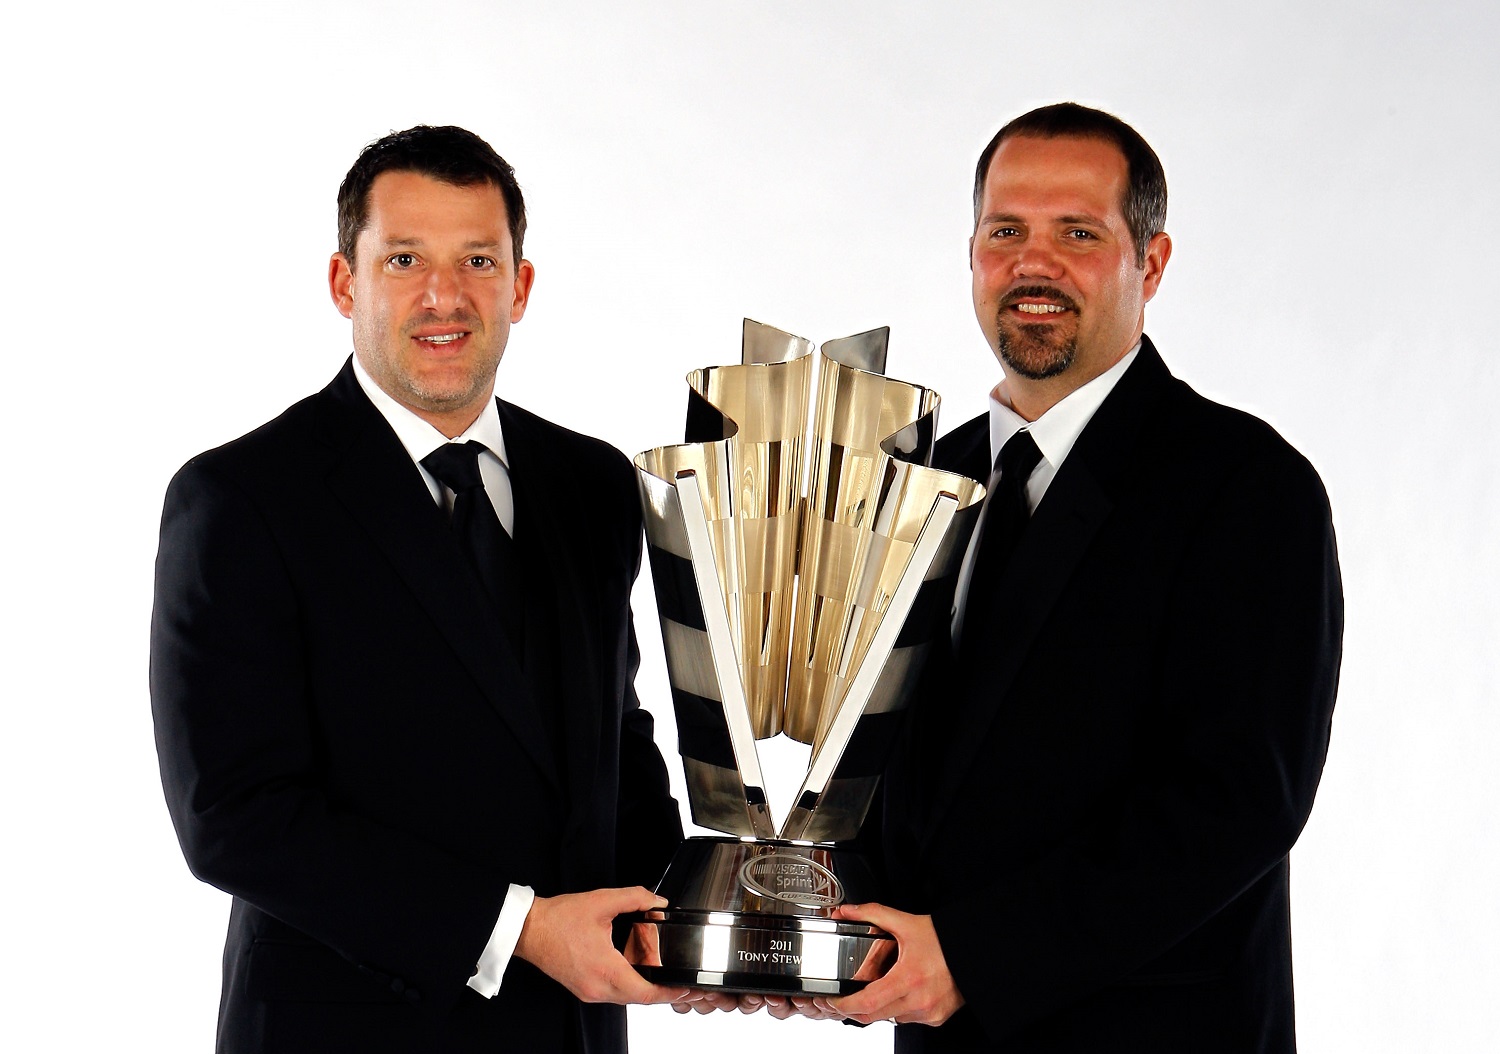 Series champion Tony Stewart and crew chief Darian Grubb pose during the 2011 NASCAR Champions Week awards ceremony. | Chris Graythen/Getty Images for NASCAR